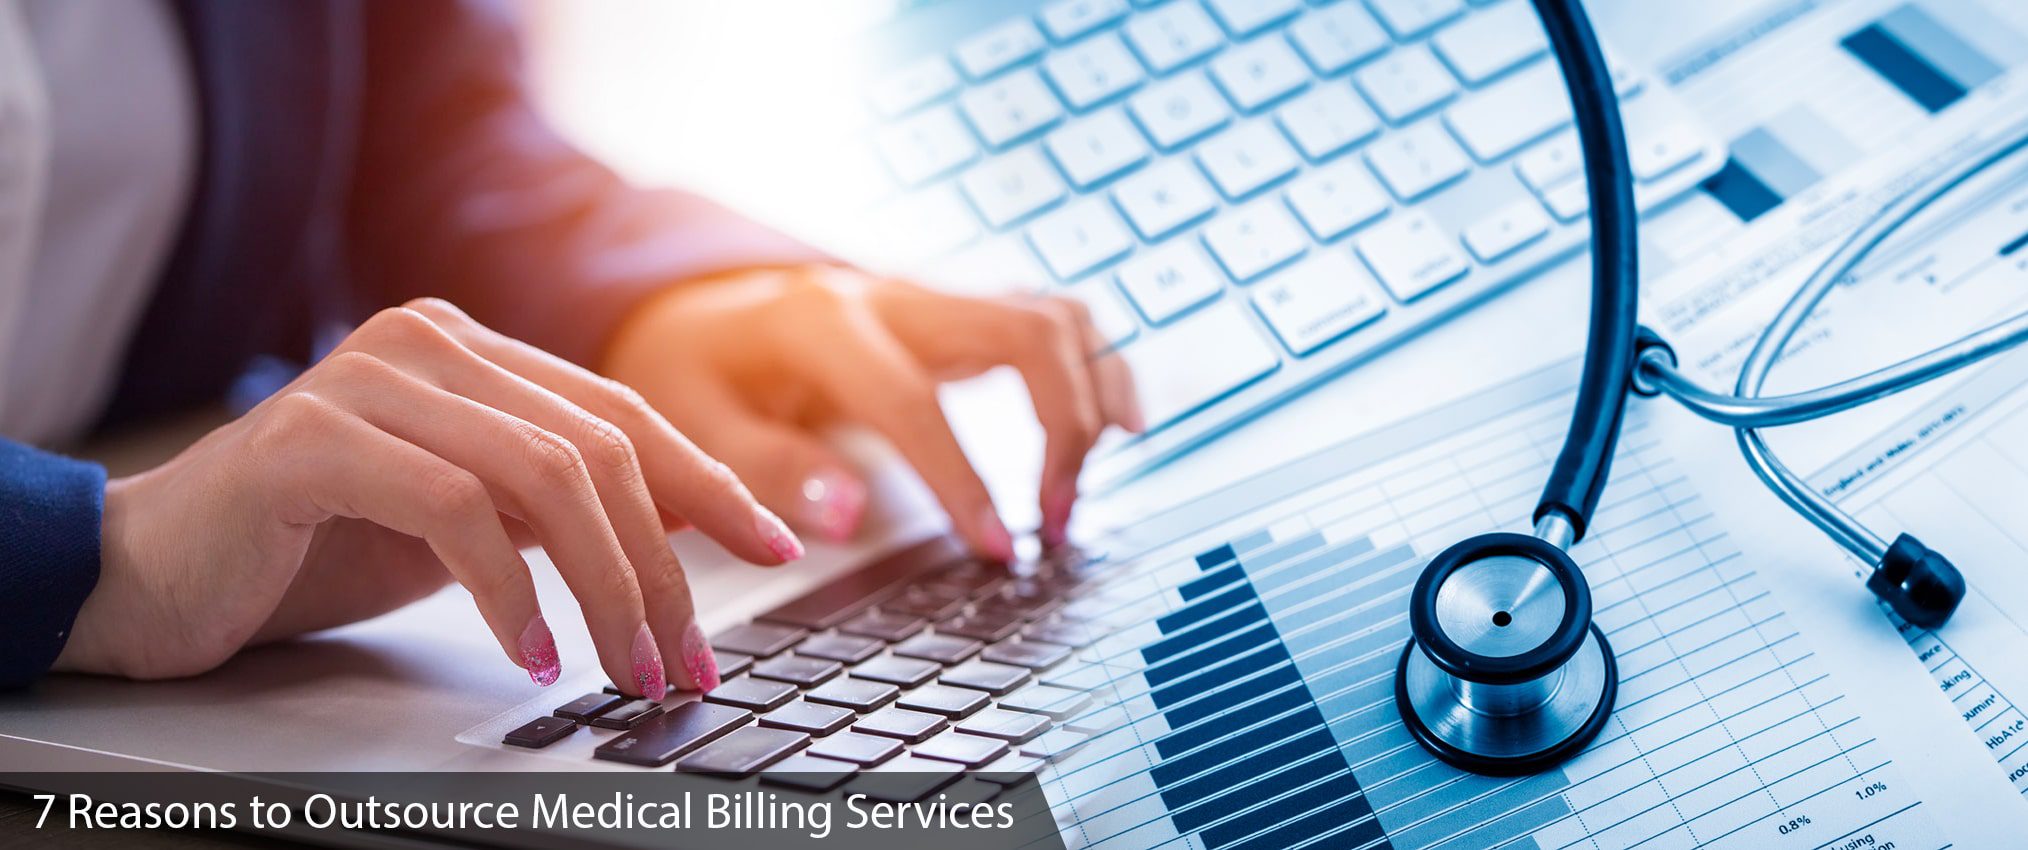 Outsource Medical Billing Services1